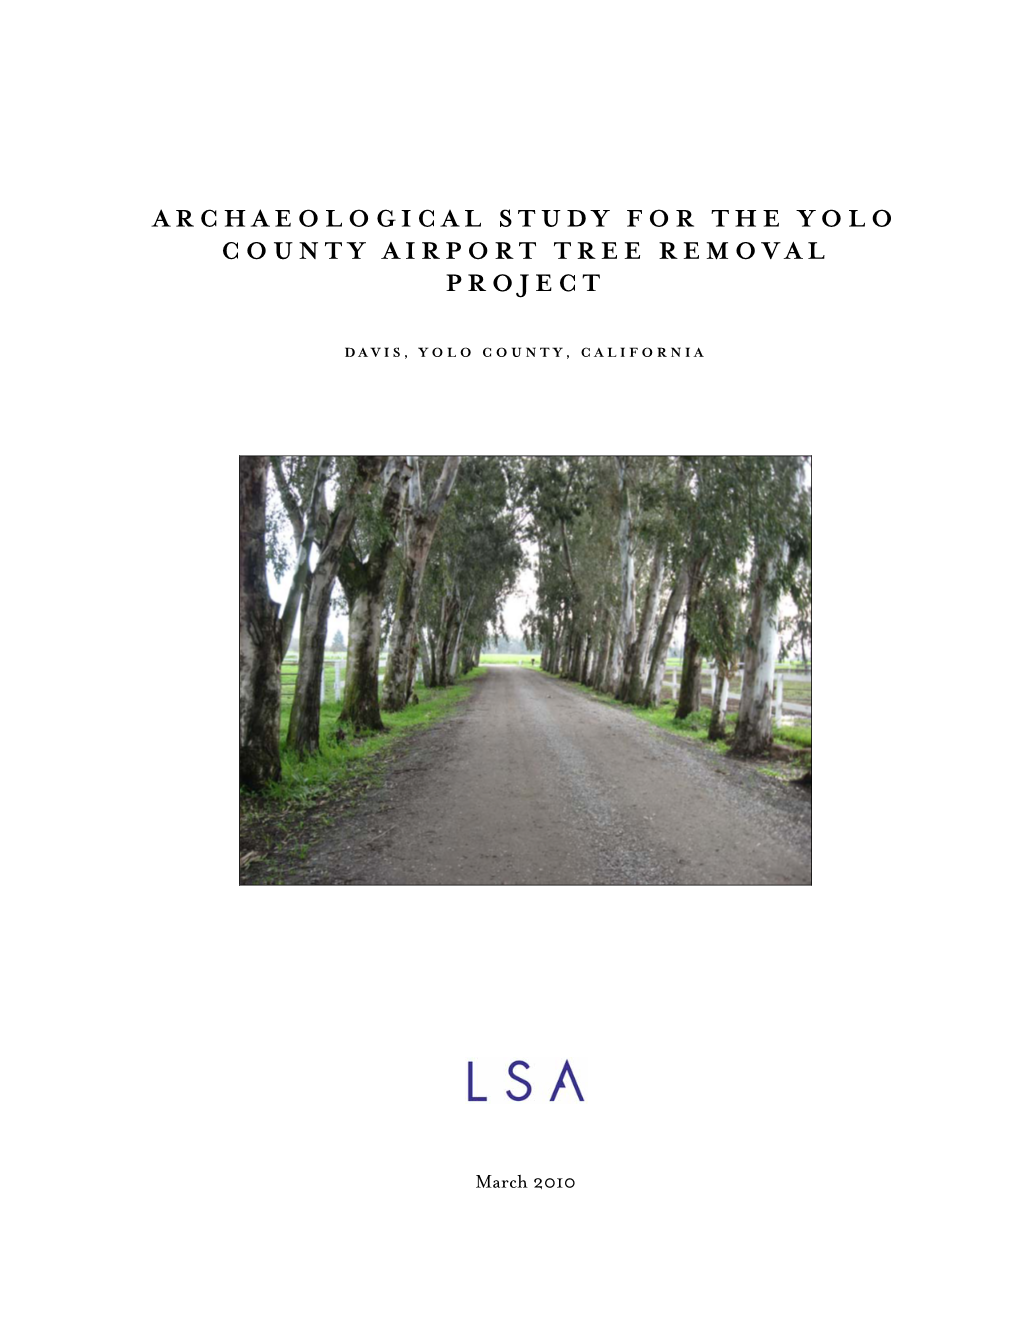 Archaeological Study for the Yolo County Airport Tree Removal Project